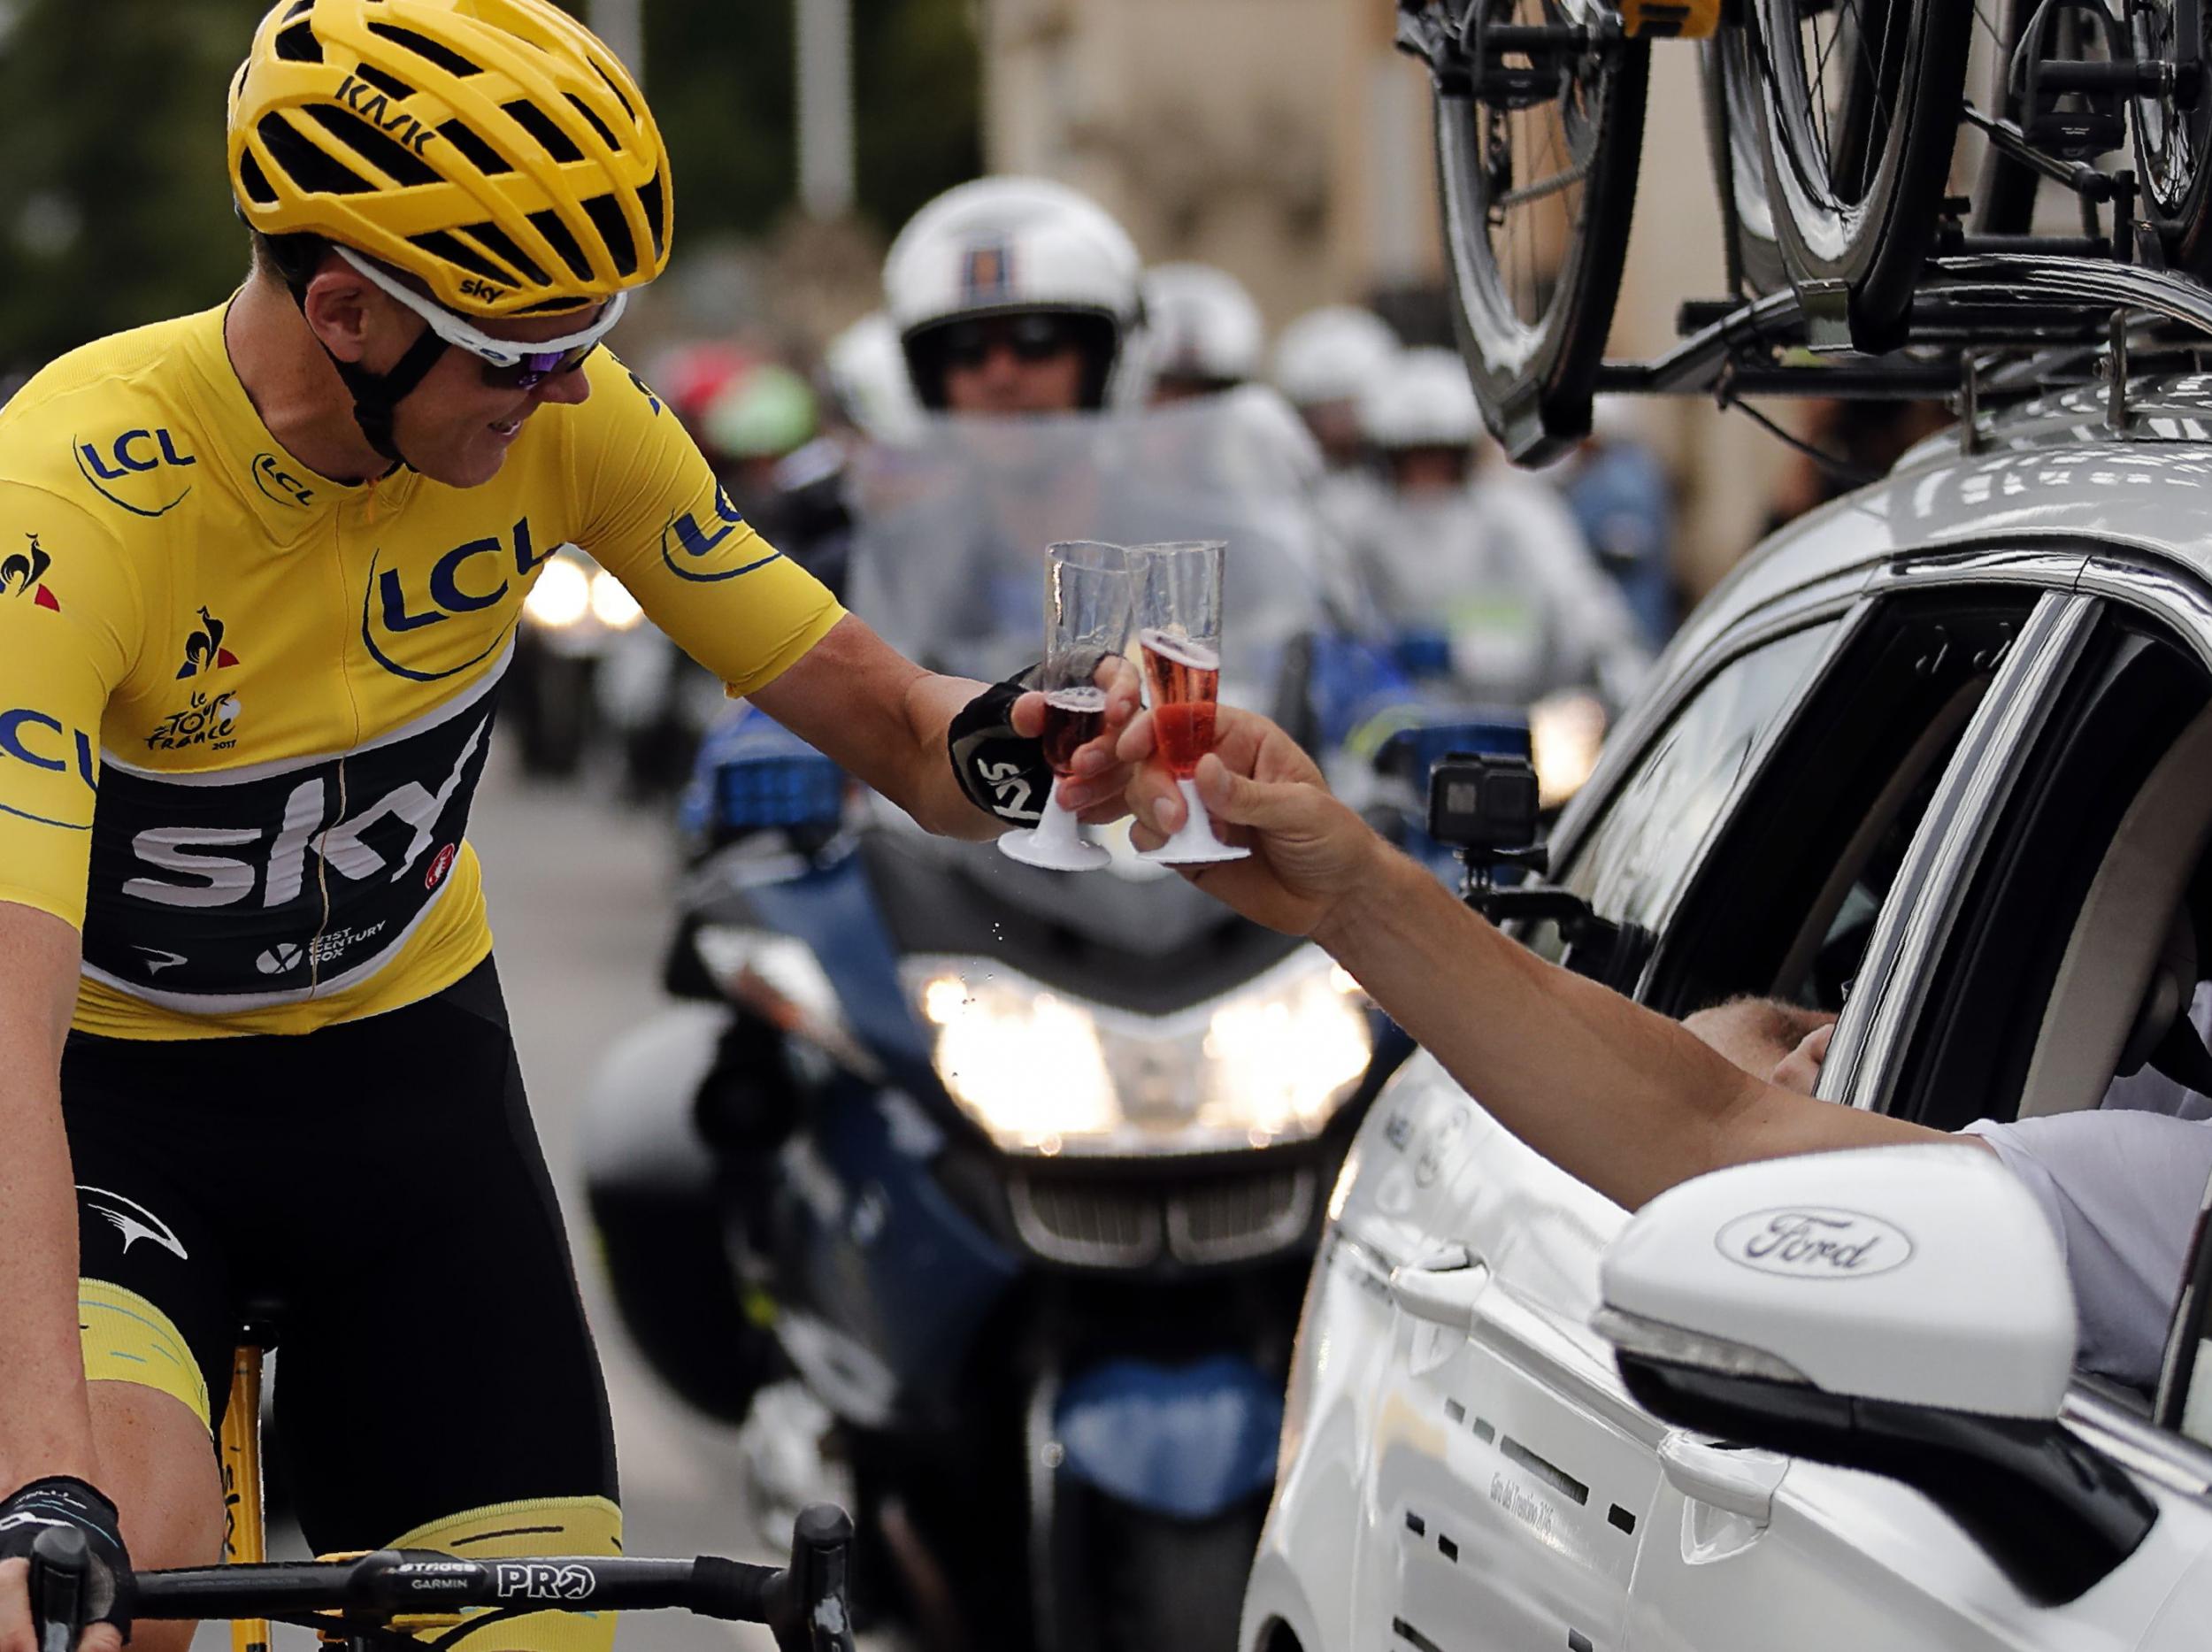 Froome was able to enjoy a glass of champagne during the final stage